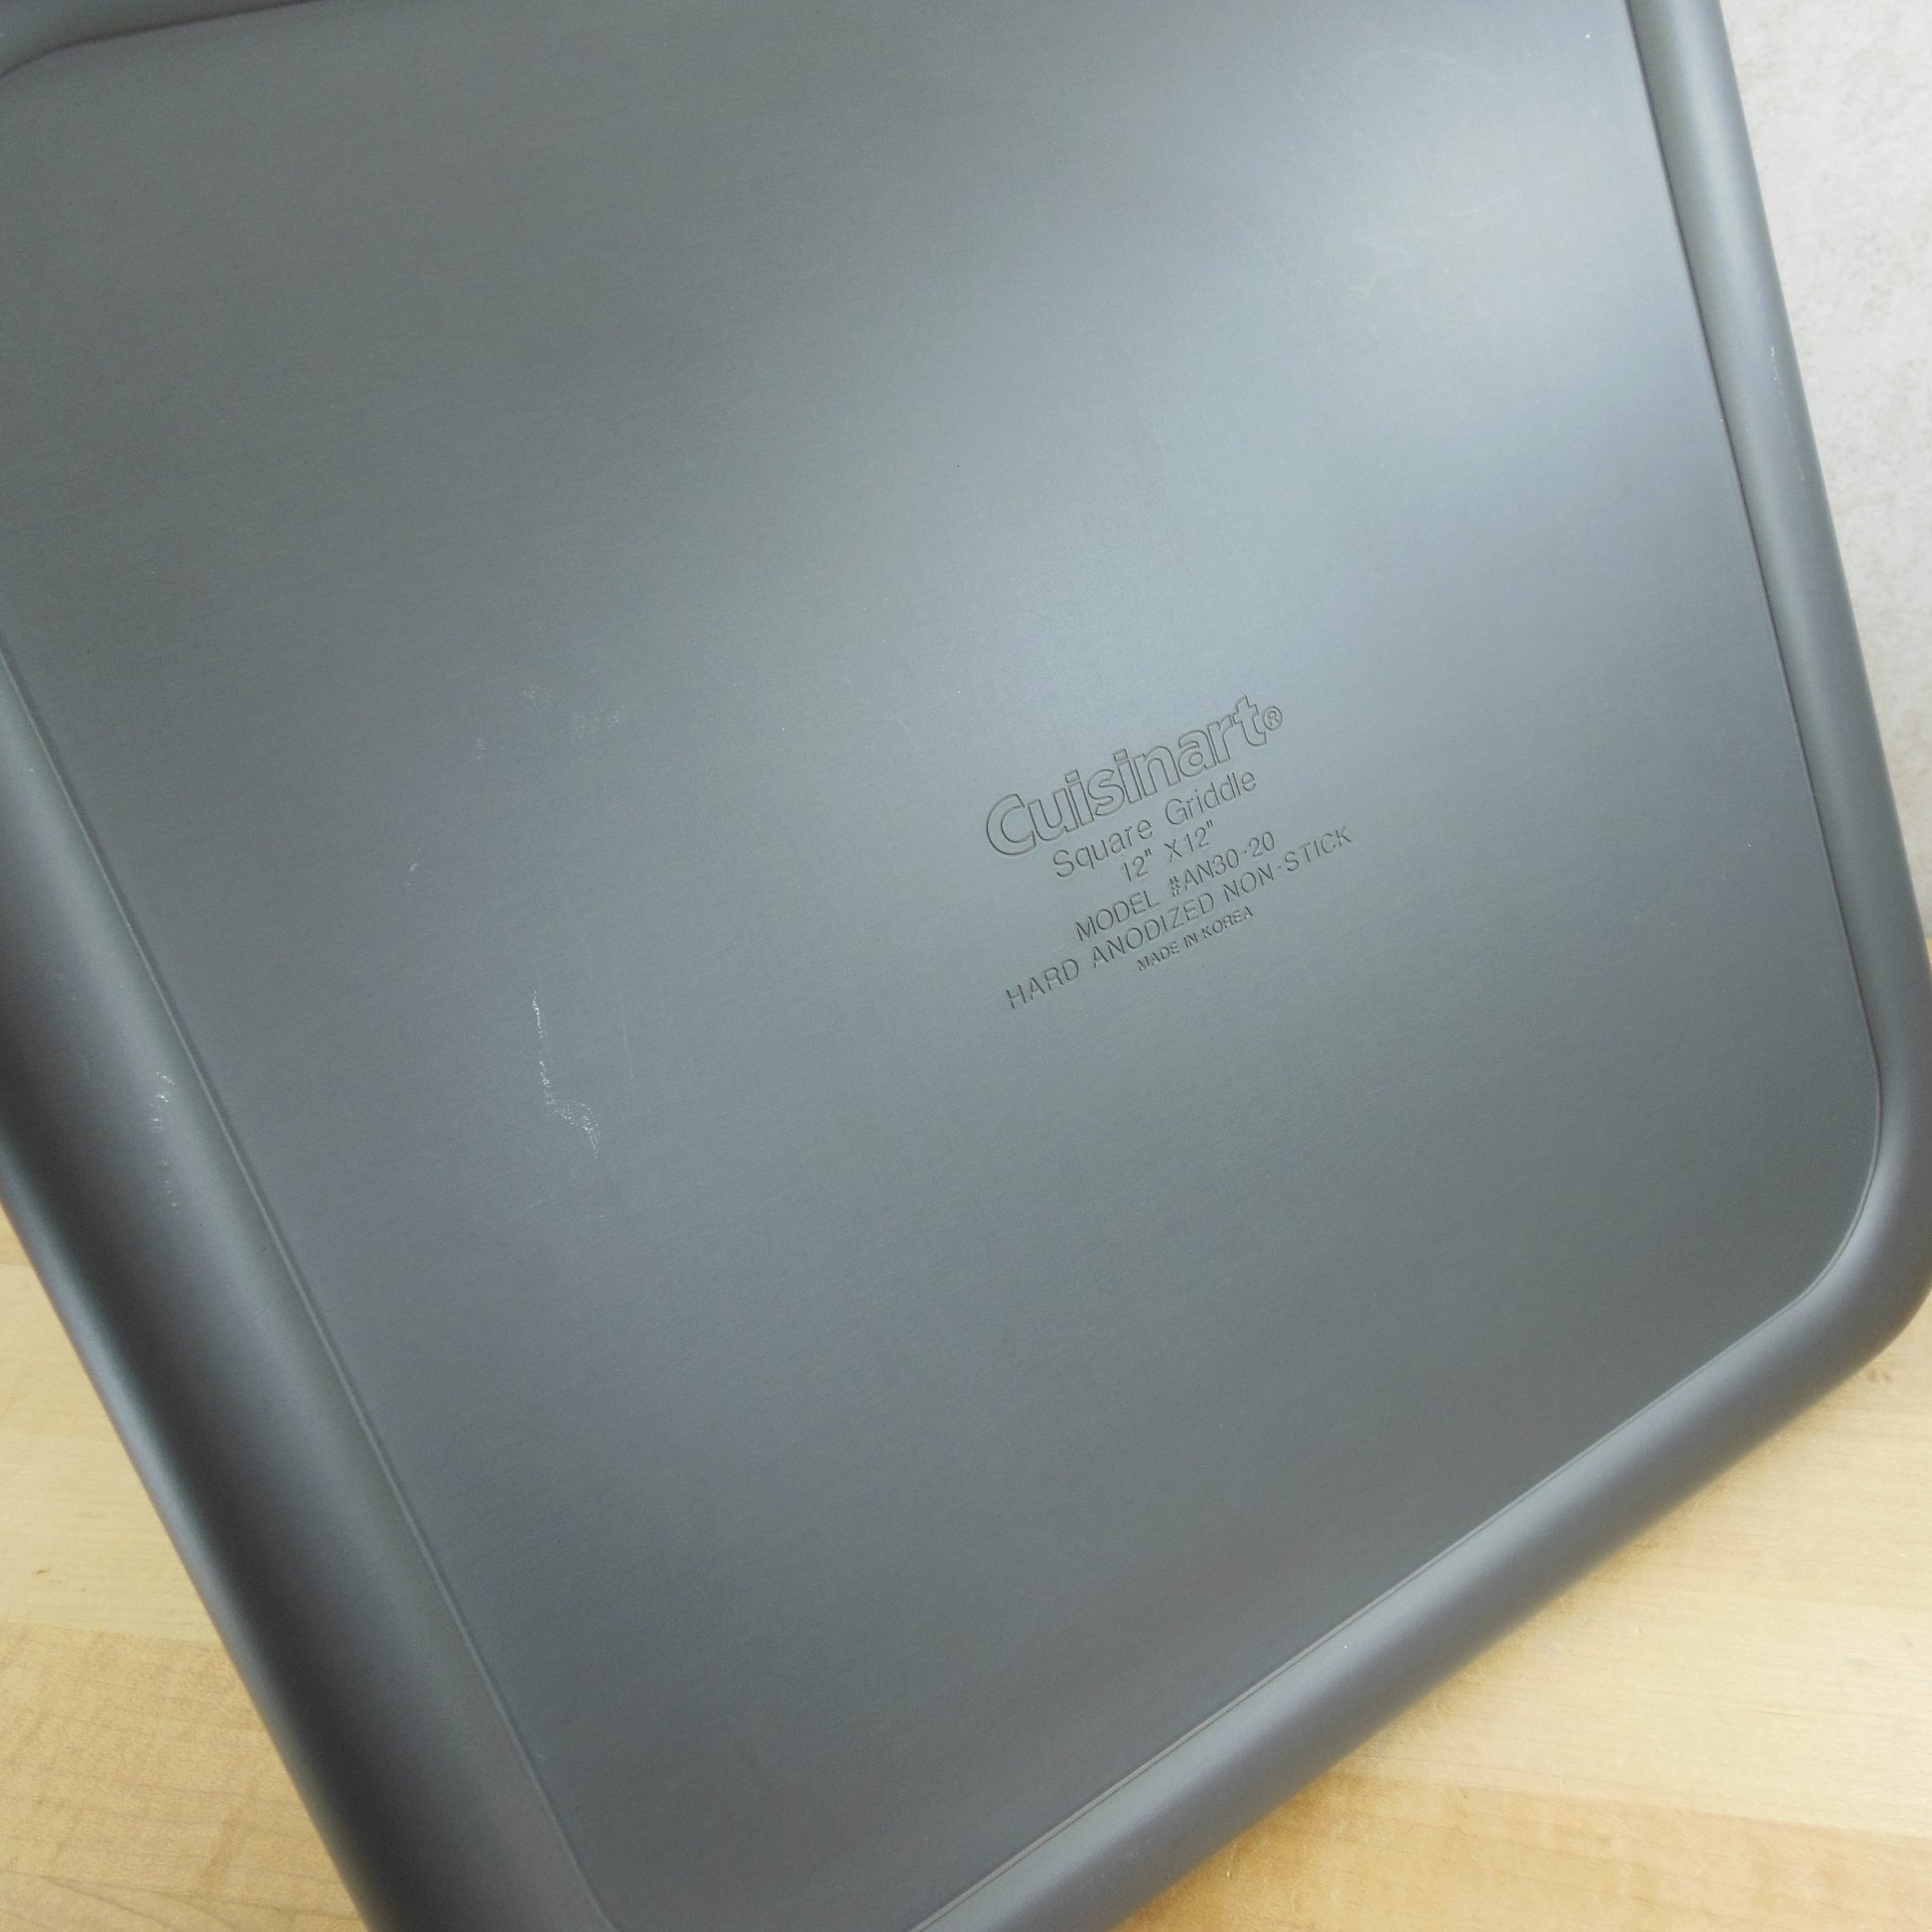 Cuisinart Hard Anodized Non-Stick 12" Square Griddle Pan AN30-20 Used